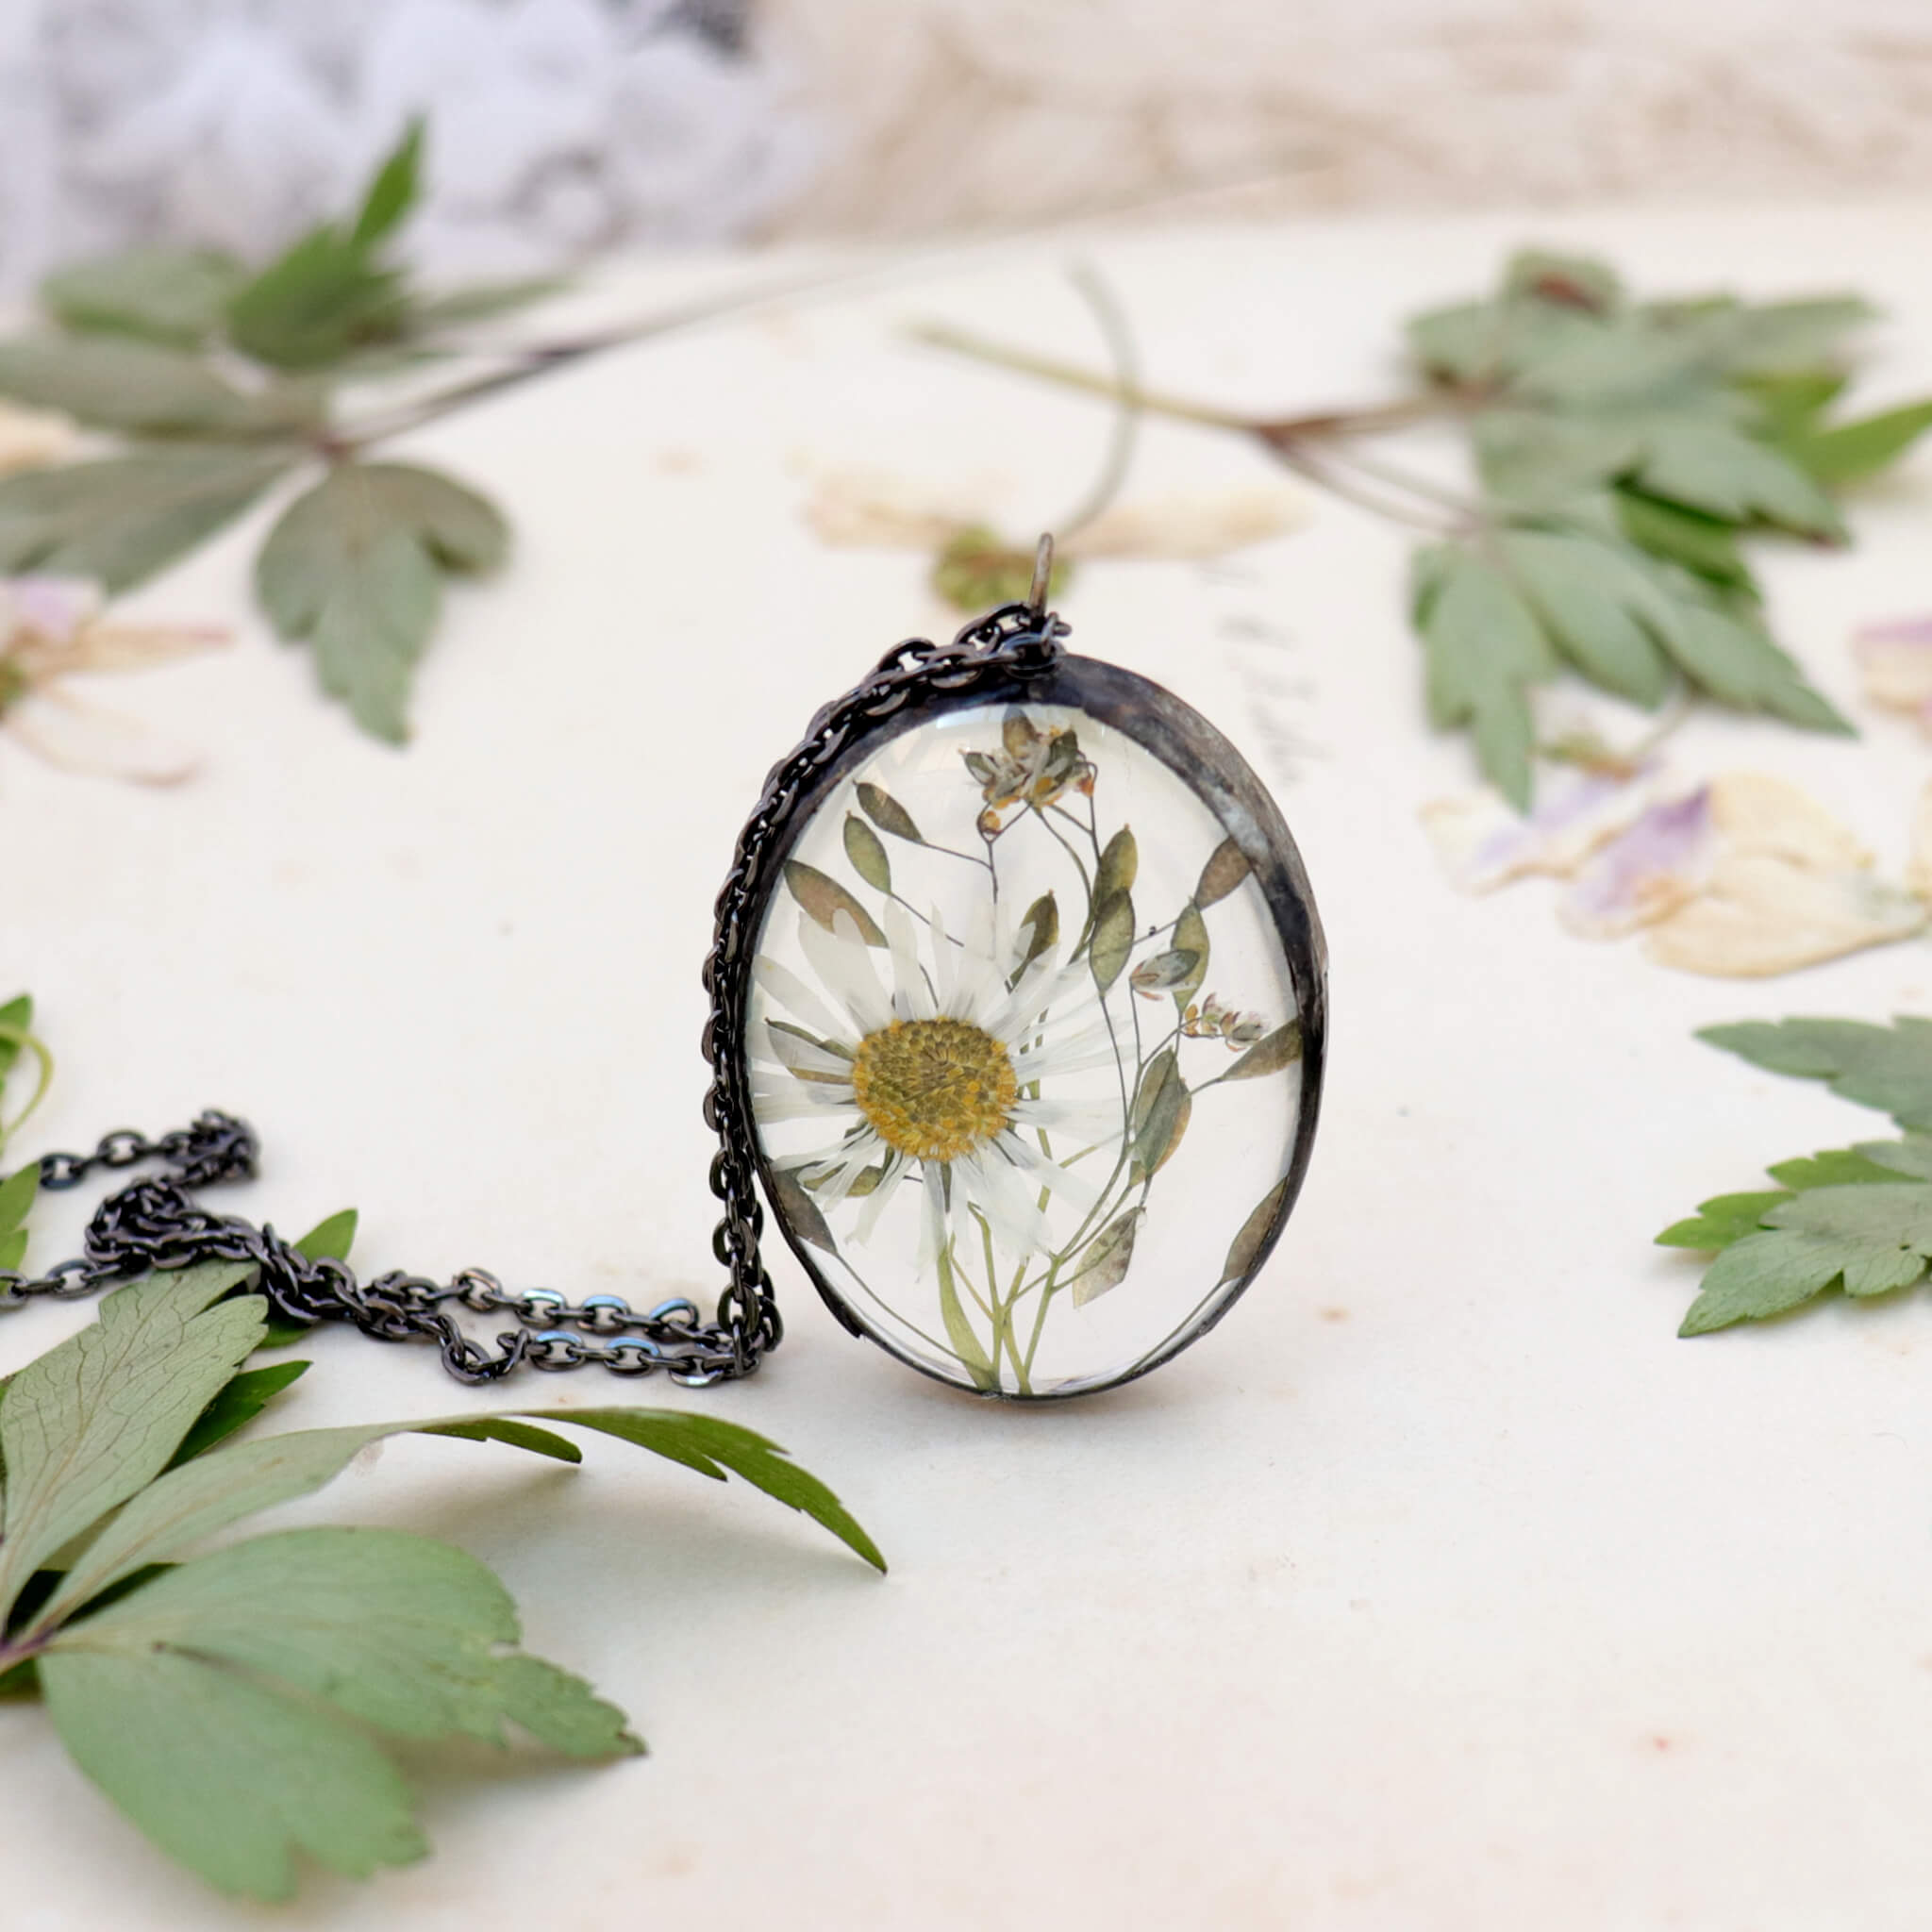 Pressed daisy necklace in oval shape standing on an edge on an old paper. Pressed anemones around